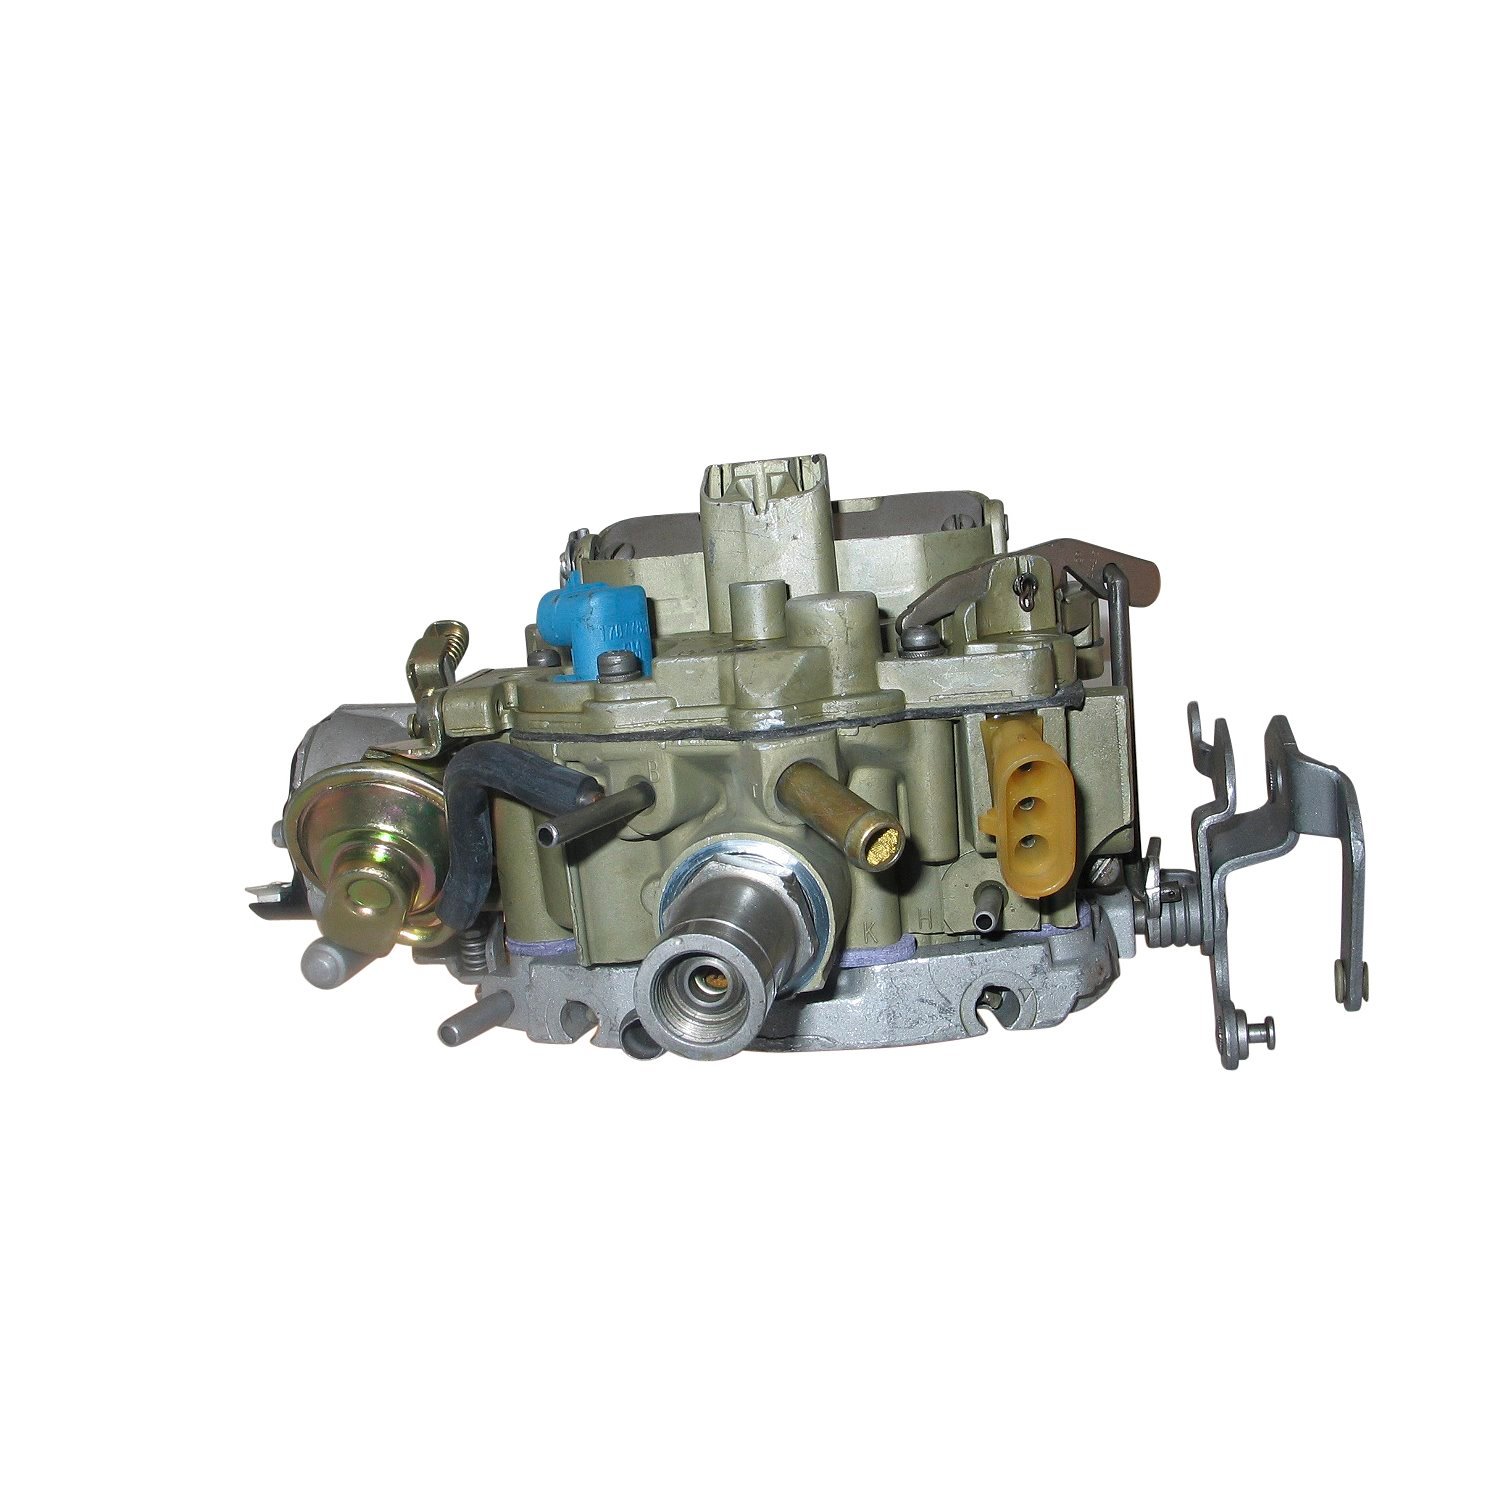 3-3694 Rochester Remanufactured Carburetor, M2ME-Style